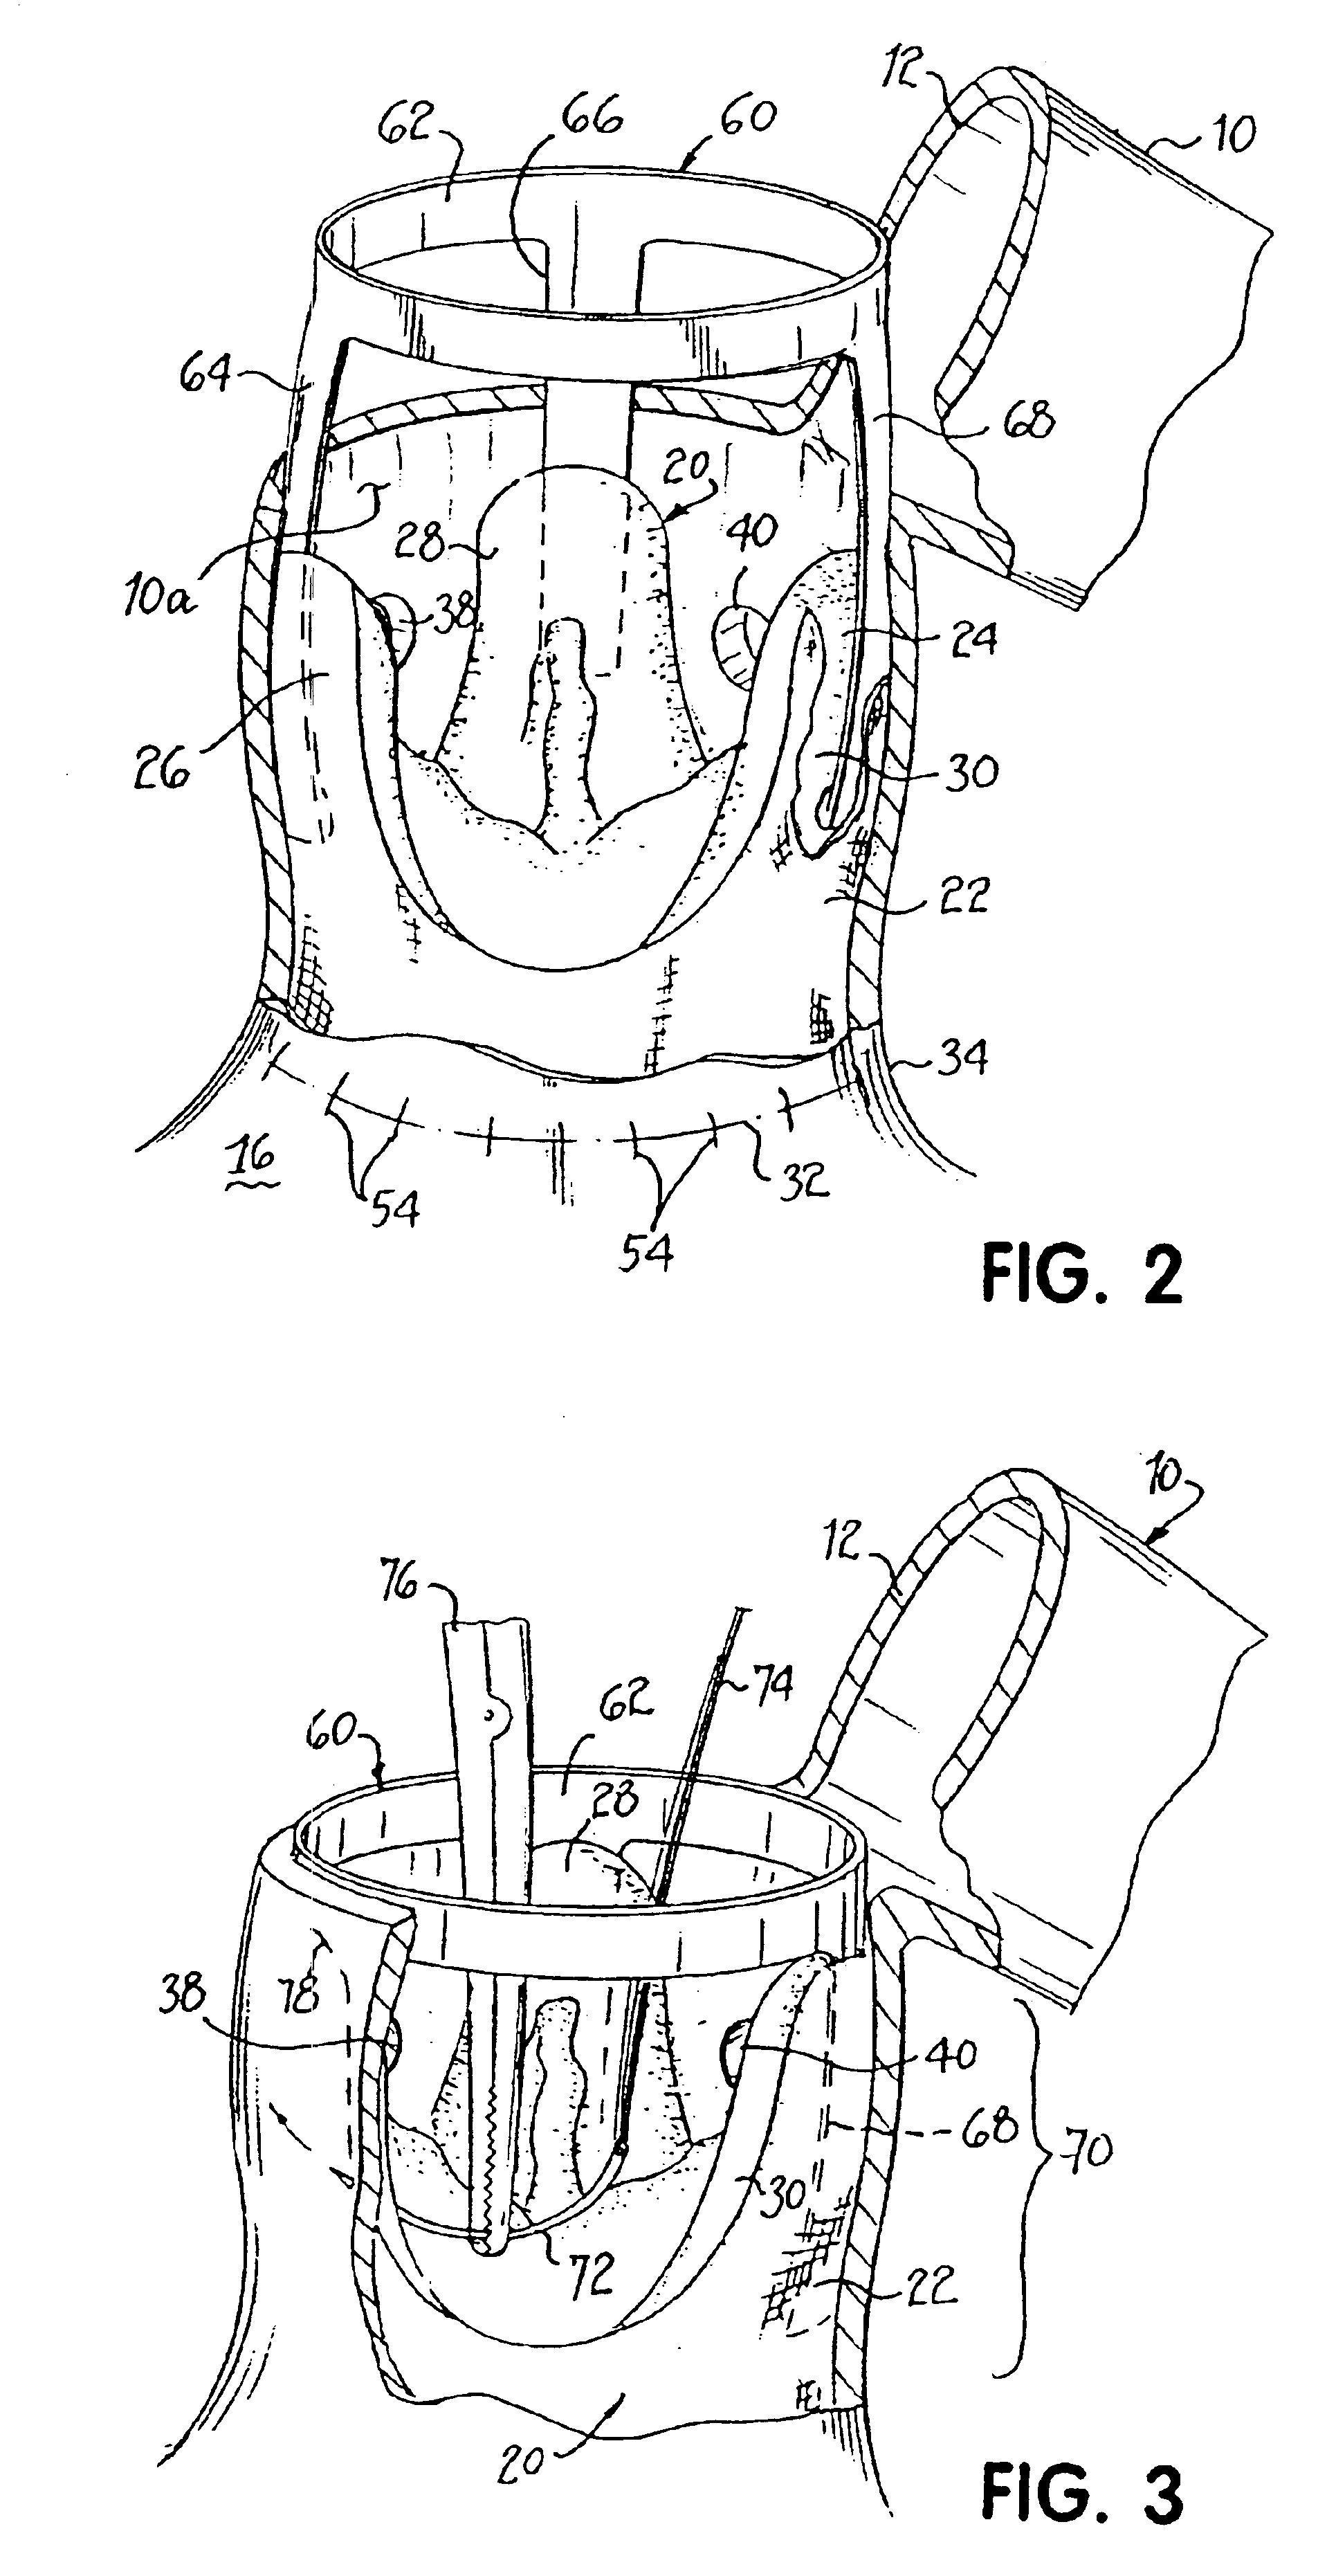 Heart valve and apparatus for replacement thereof